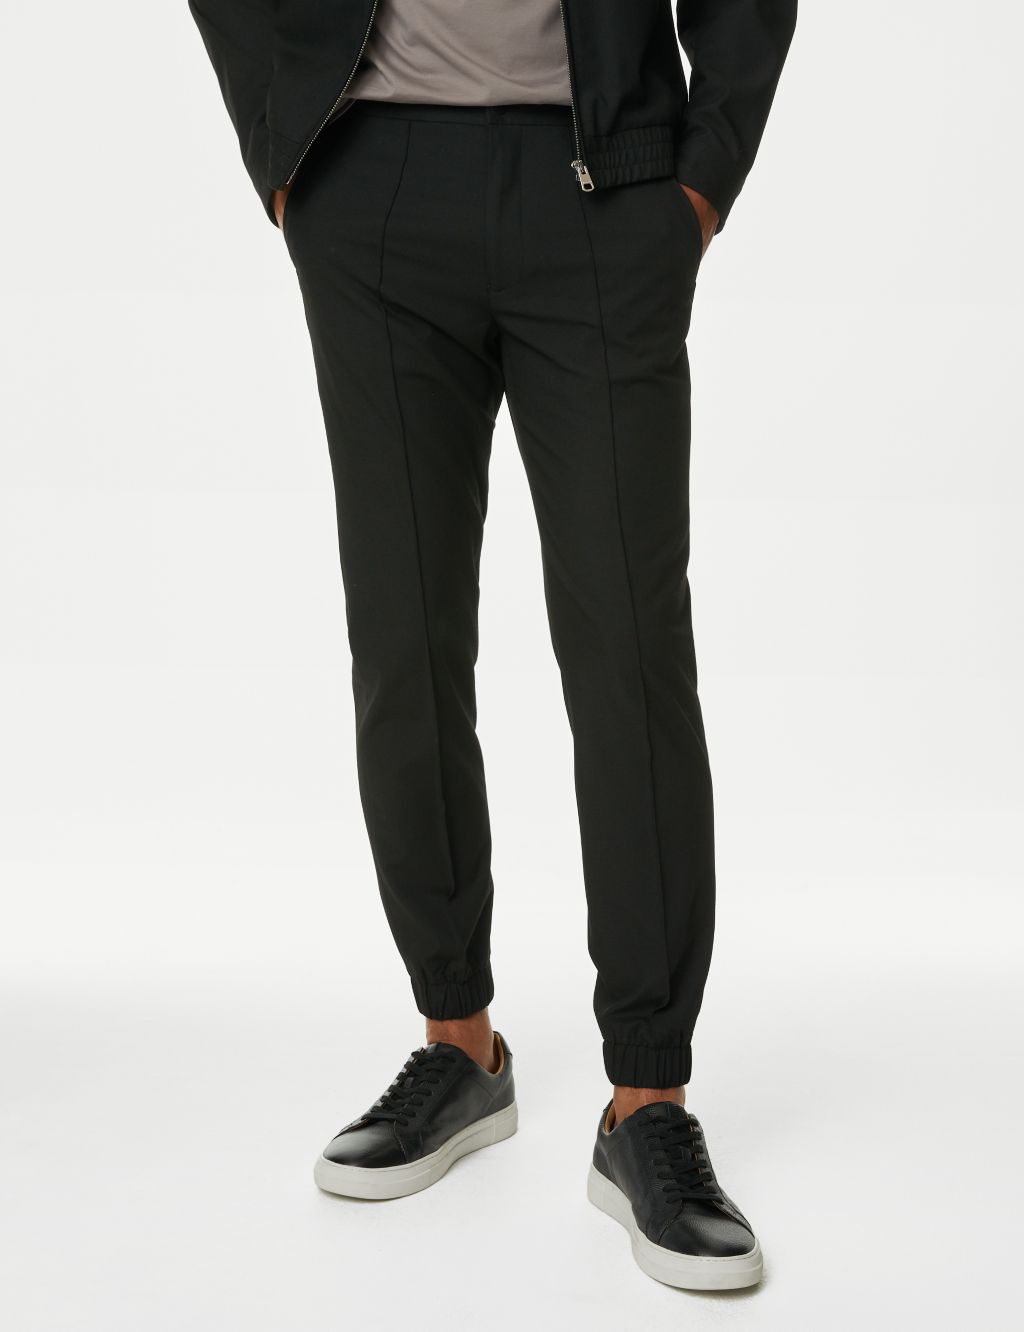 Tailored Fit Flat Front Textured Trousers image 3